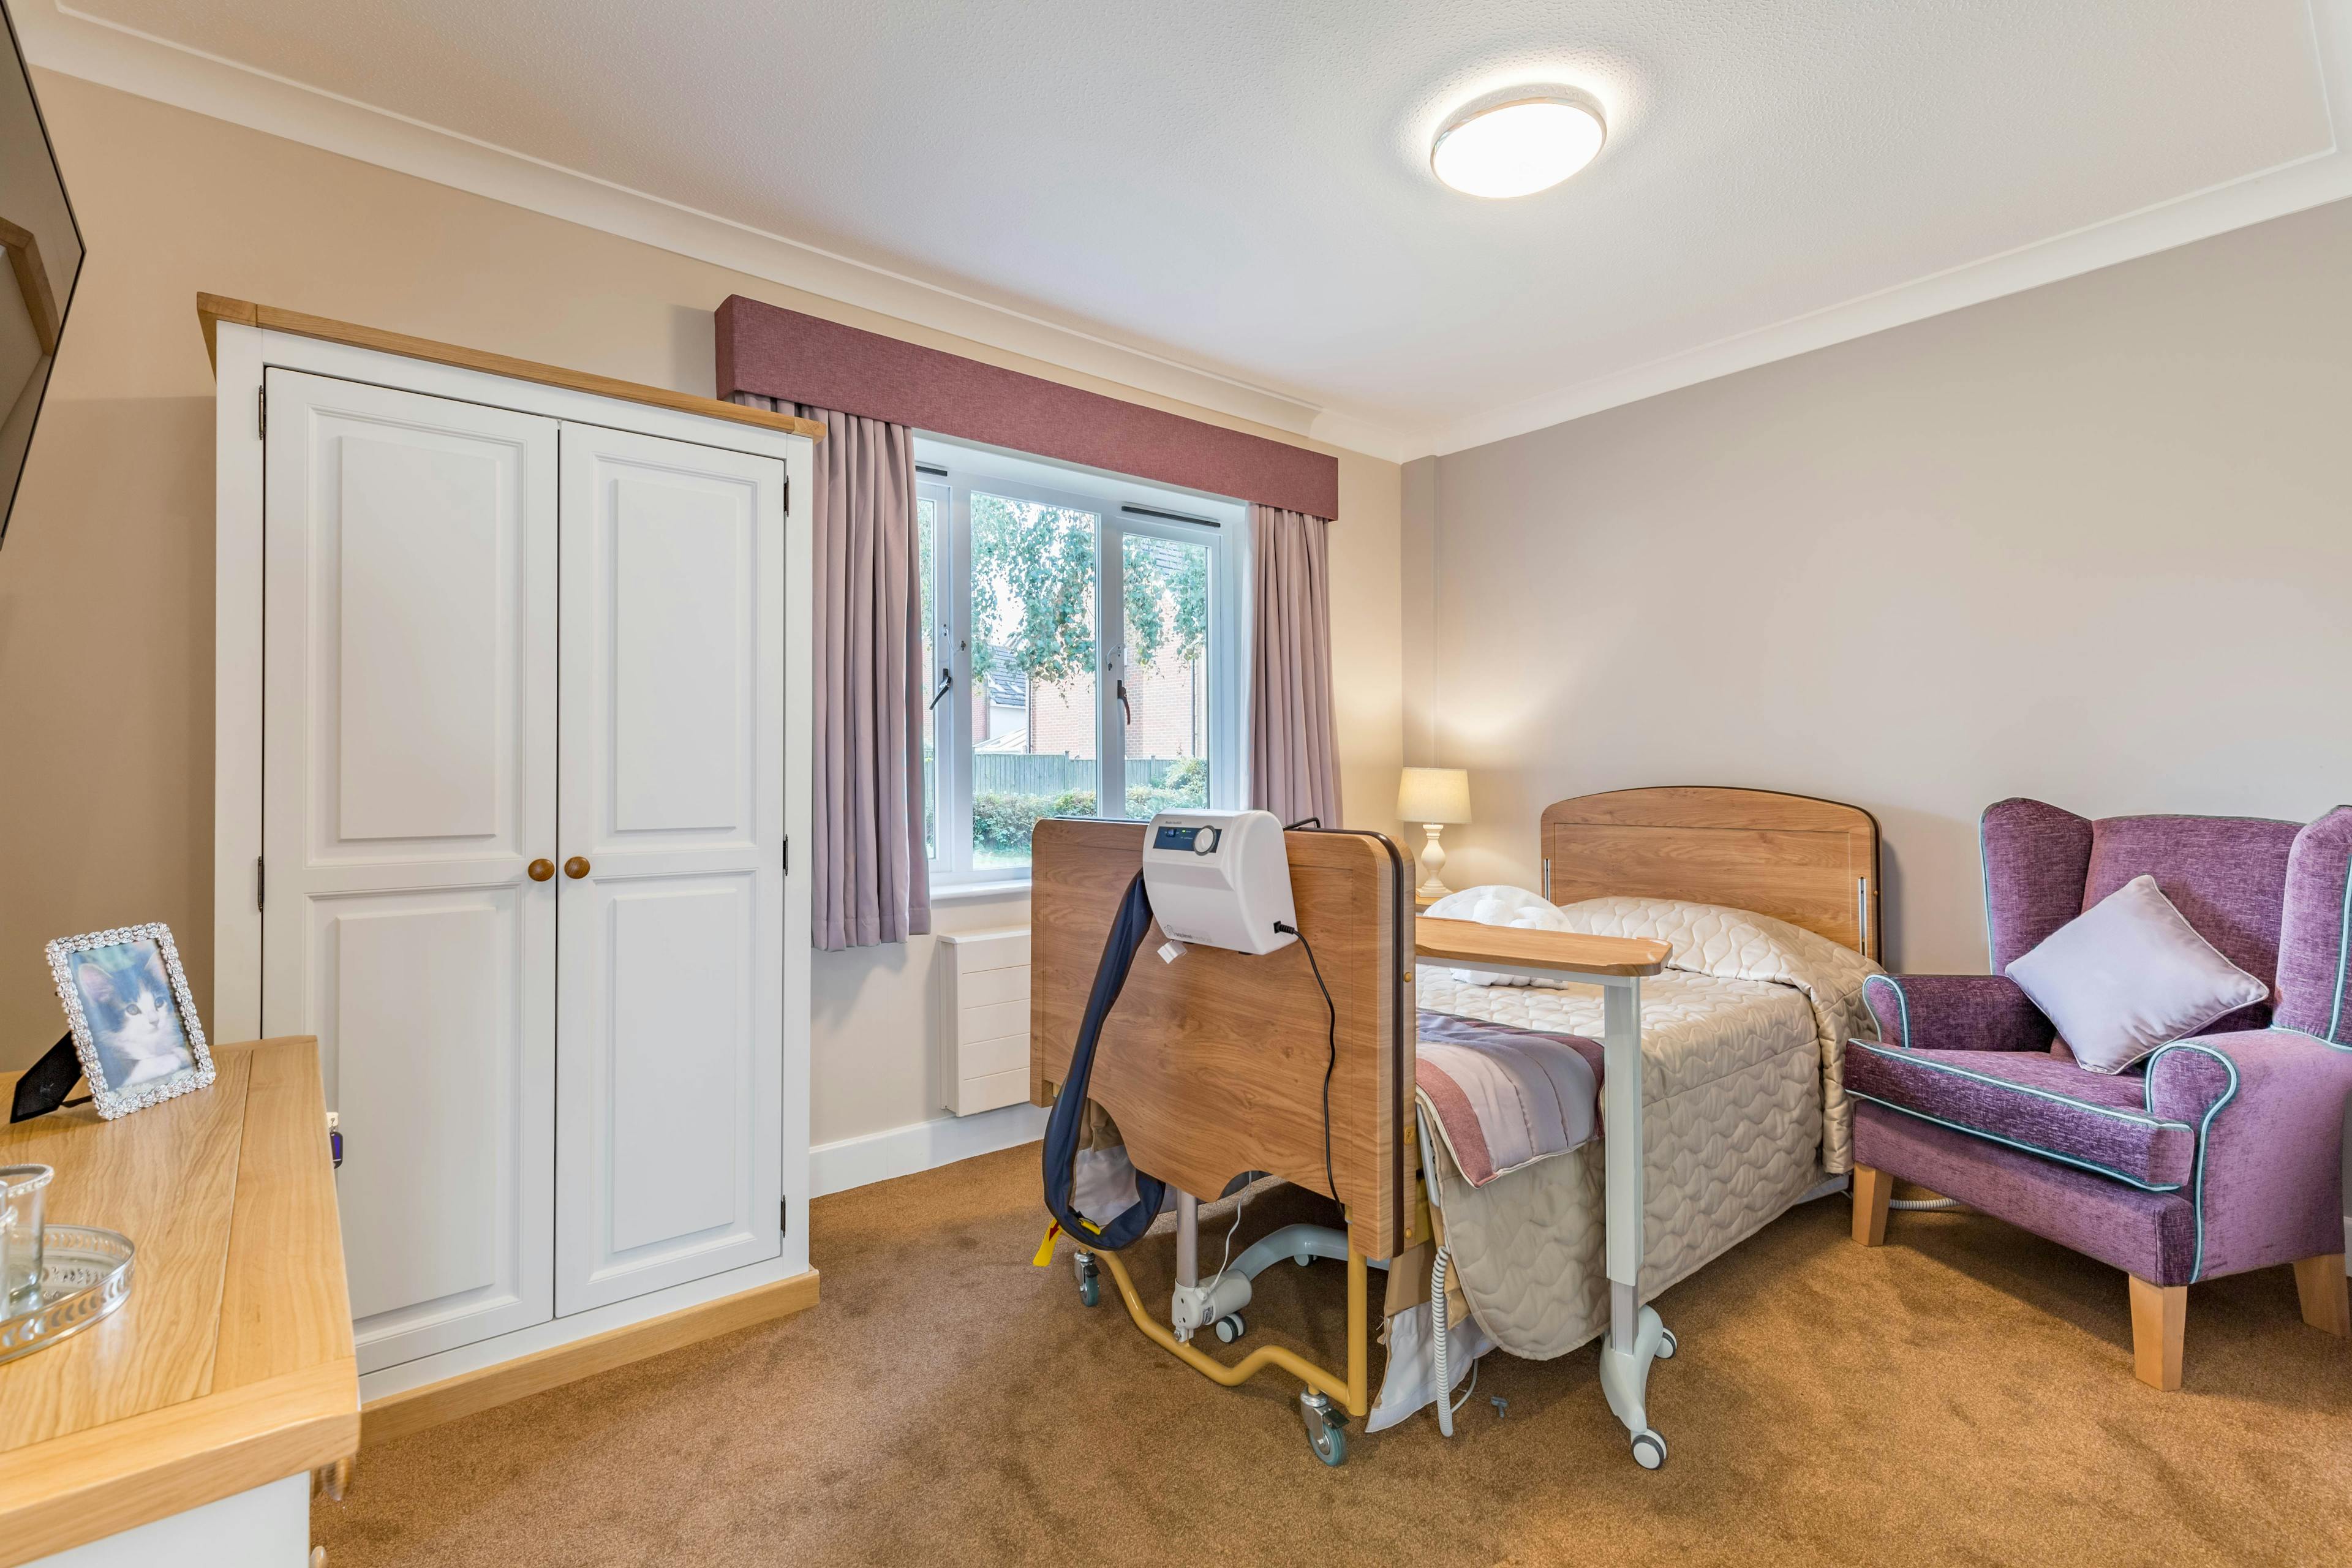 Bedroom at Leonard Lodge Care Home in Brentwood, Essex